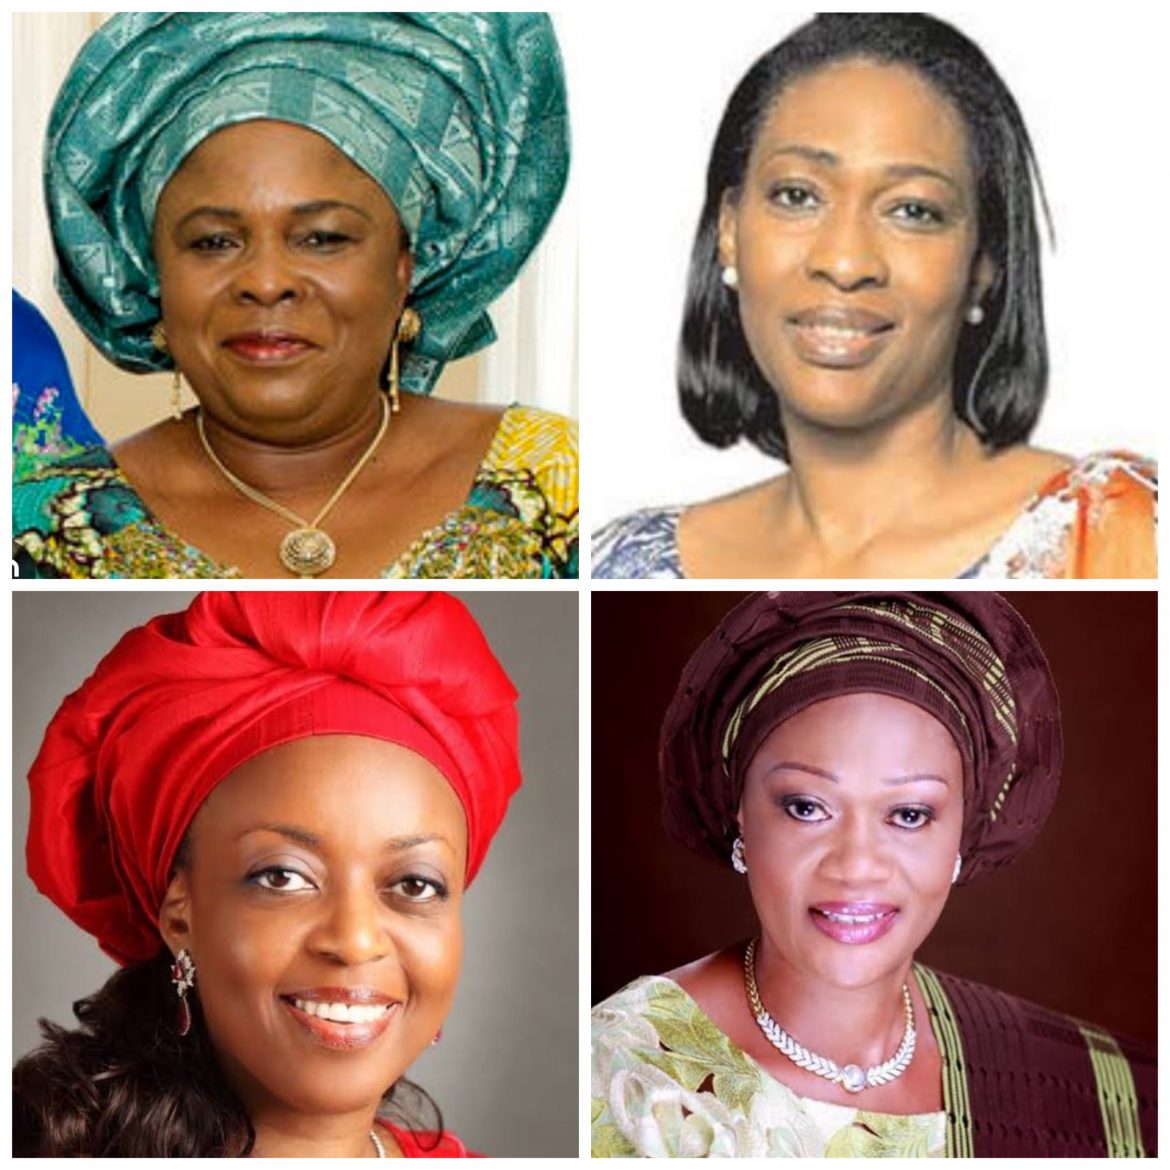 THE ROLE OF POLITICIANS’ WIVES IN COMBATING CORRUPTION IN NIGERIA